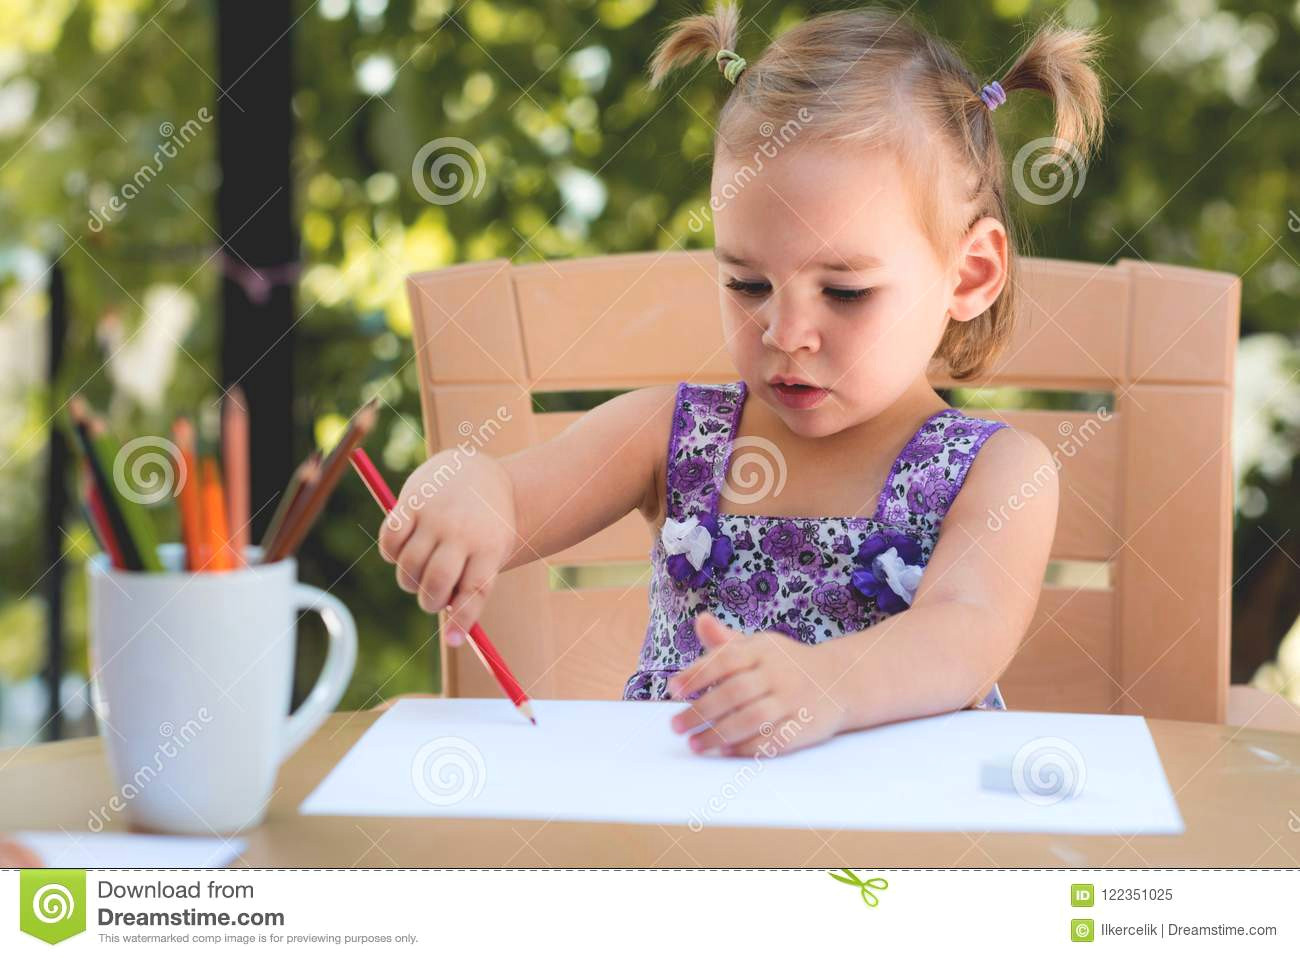 happy smiling baby girl drawing pictures outdoors